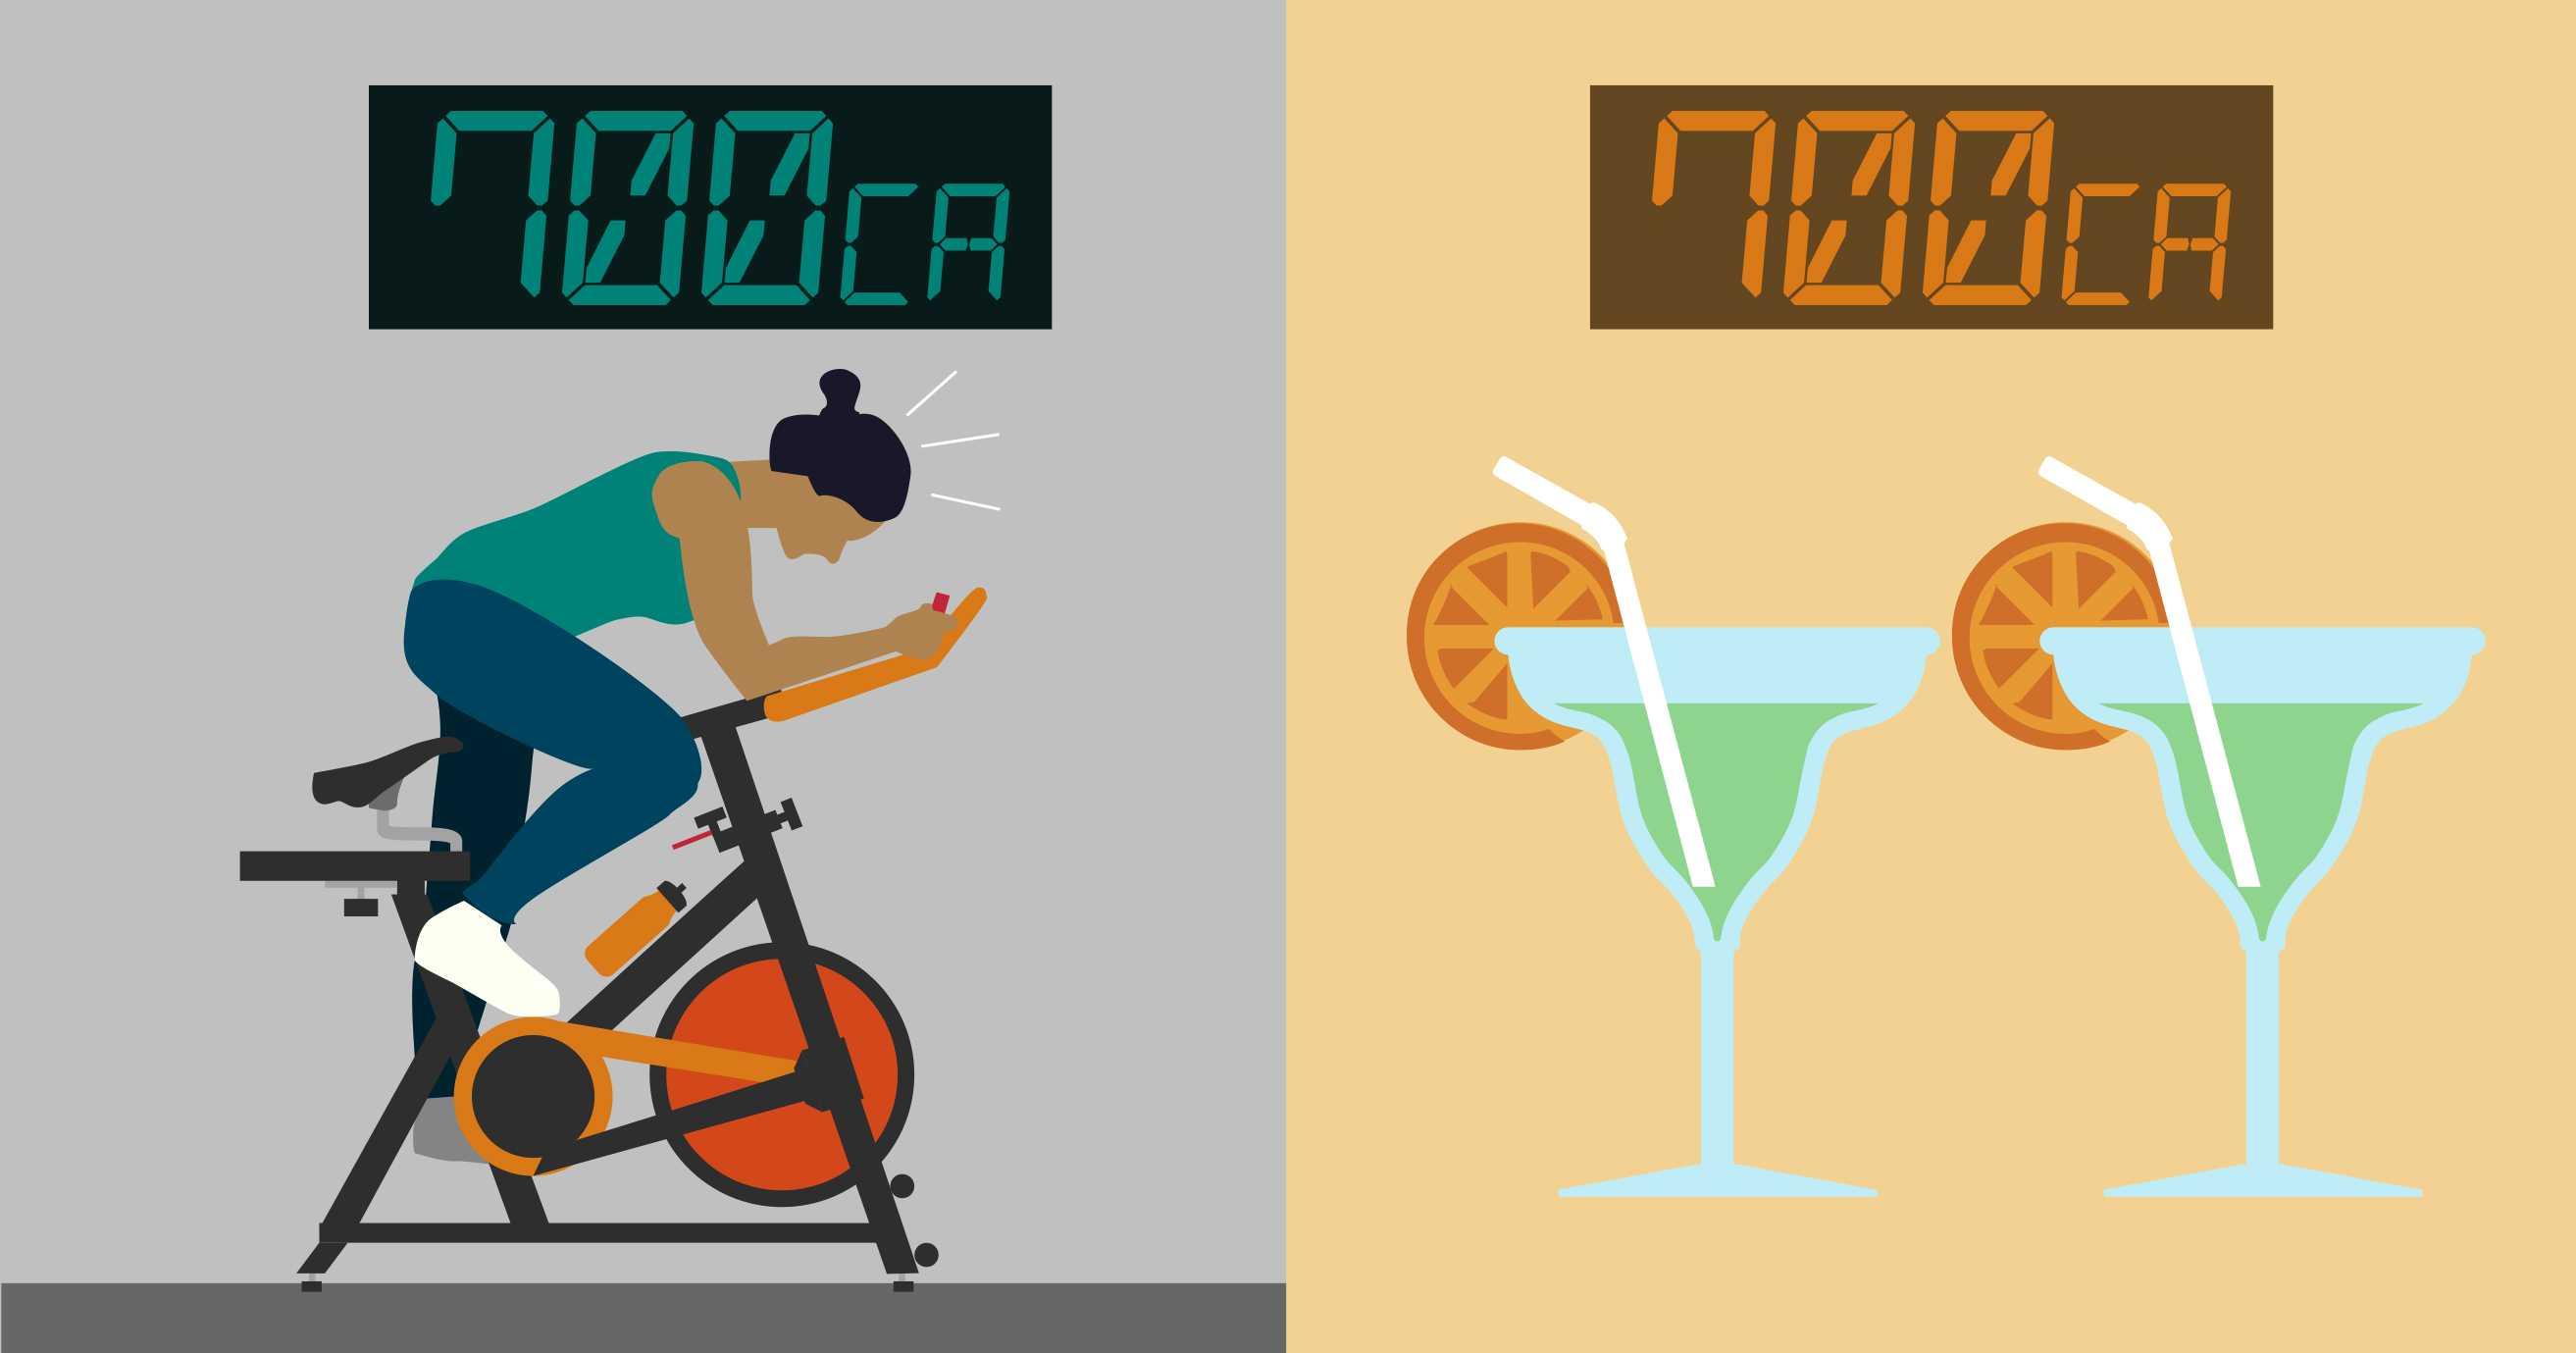 Why you shouldn't exercise to lose weight, explained with 60+ studies